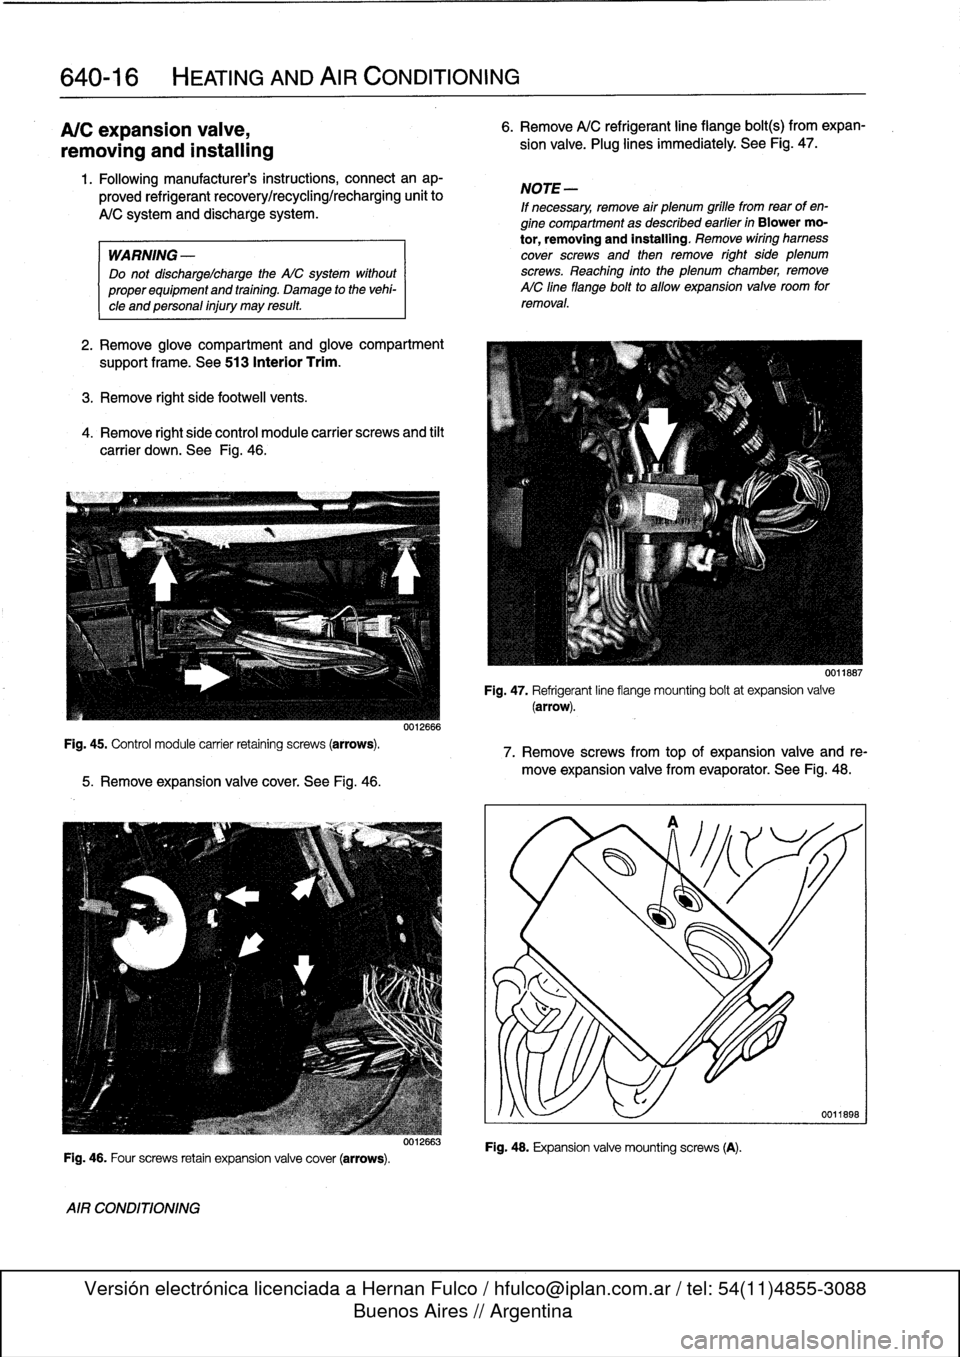 BMW 318i 1997 E36 Owners Guide 
640-16

	

HEATING
AND
AIR
CONDITIONING

A/C
expansion
valve,

removing
and
installing

Fig
.
45
.
Control
module
carrier
retaining
screws
(arrows)
.

1
.
Following
manufacturers
instructions,
connec